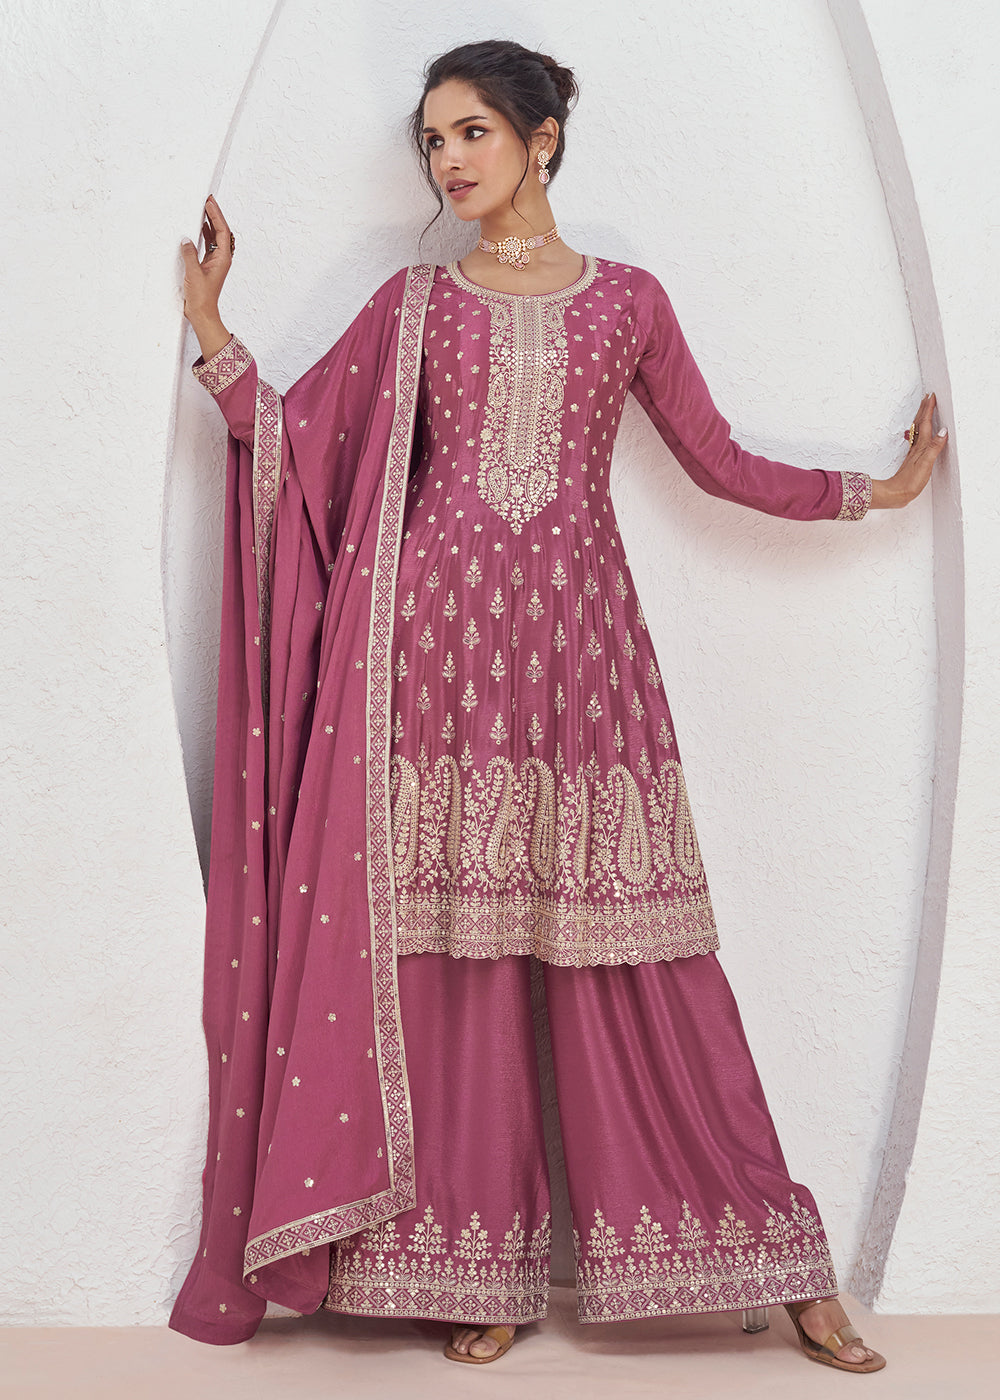 Buy Now Incredible Pink Embroidered Chinnon Festive Palazzo Suit Online in USA, UK, Canada, Germany, Australia & Worldwide at Empress Clothing.